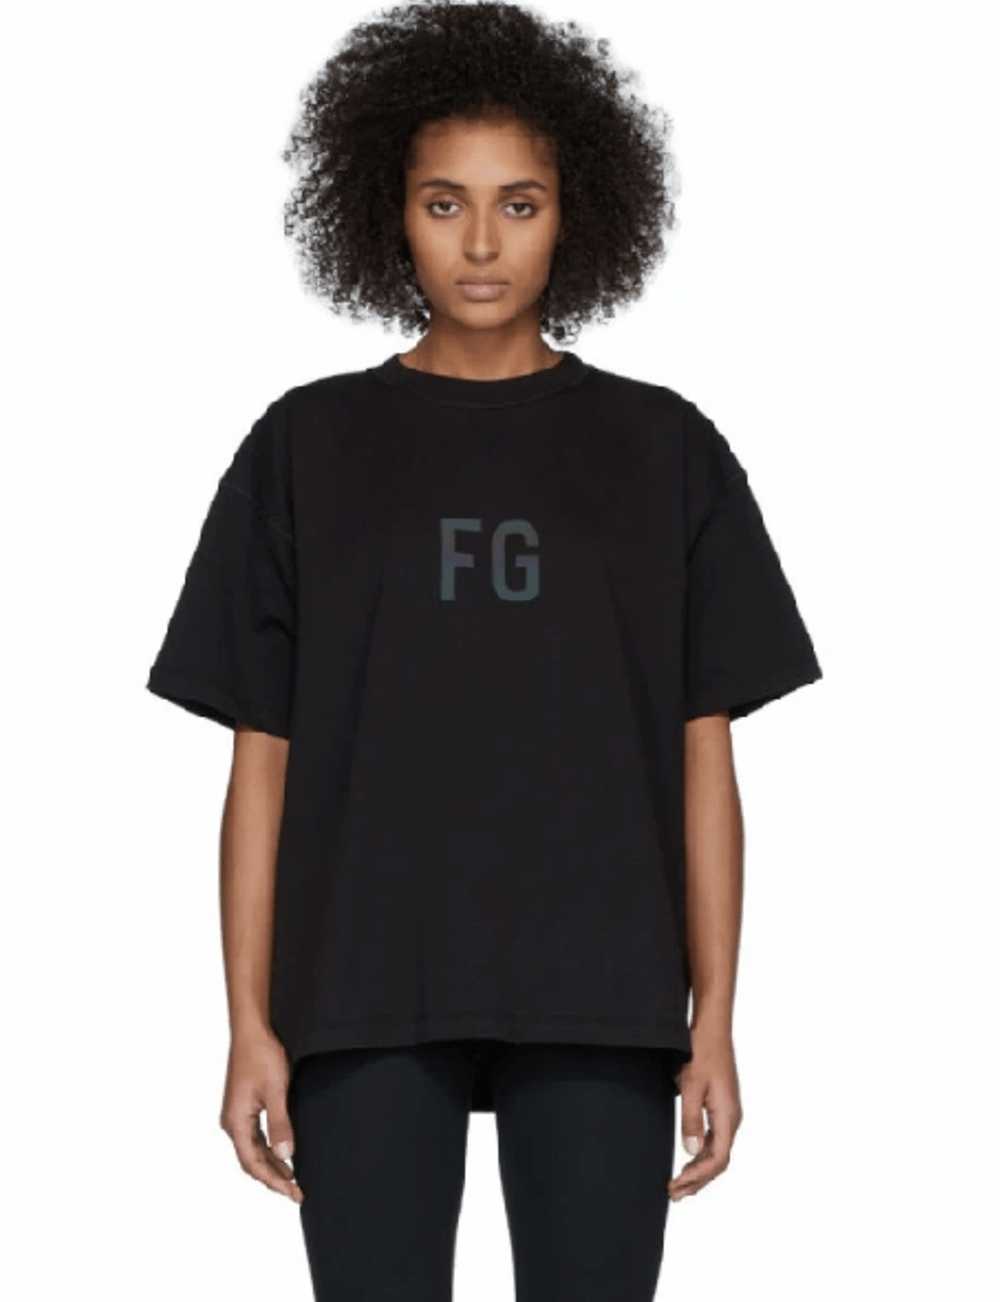 Fear of God Sixth Collection FG Oversized Tee Bla… - image 1